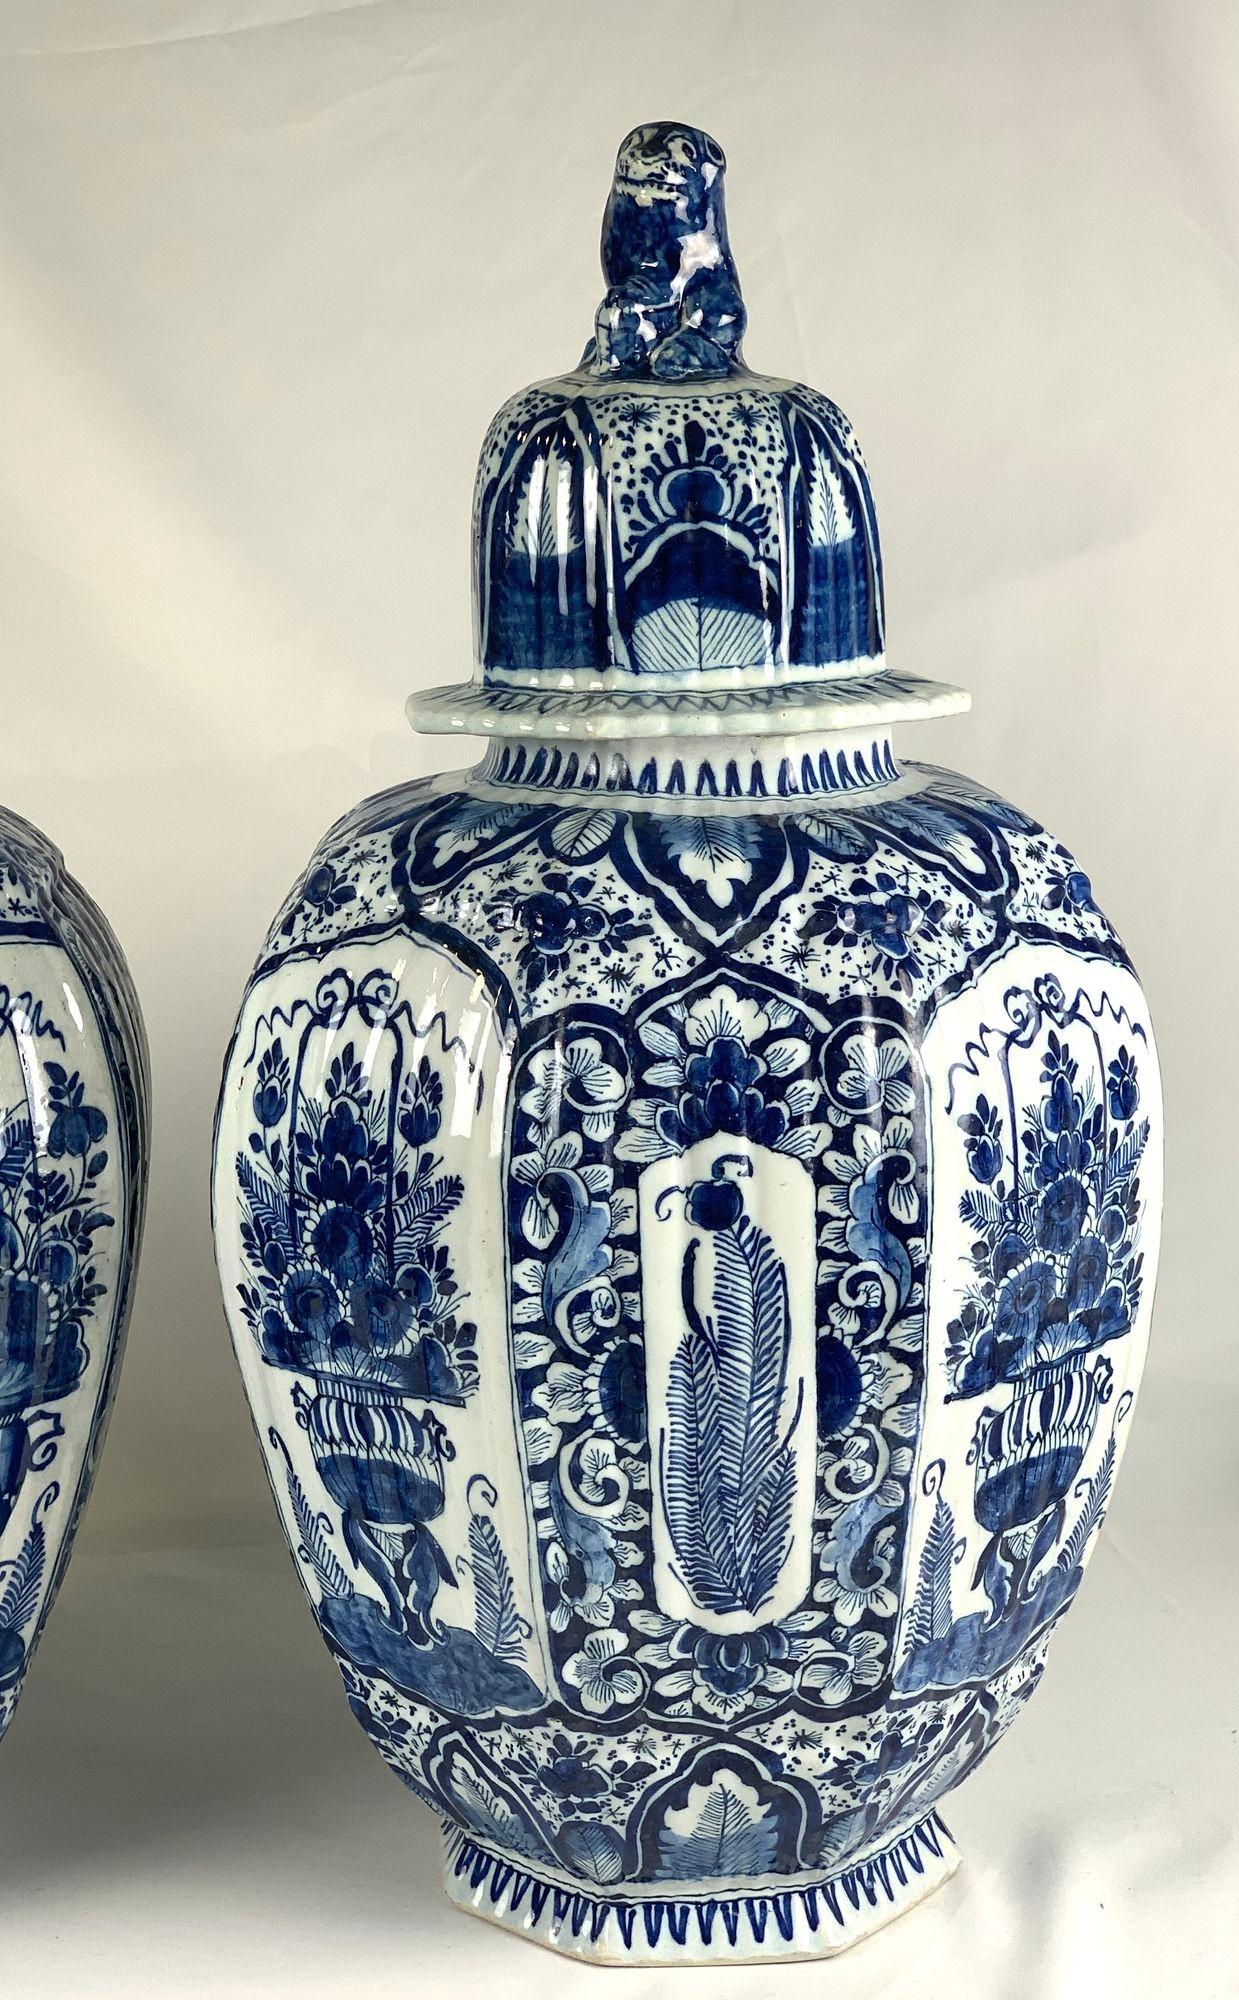 Large Blue and White Delft Jars Hand-Painted 18th Century Netherlands Circa 1780 For Sale 5